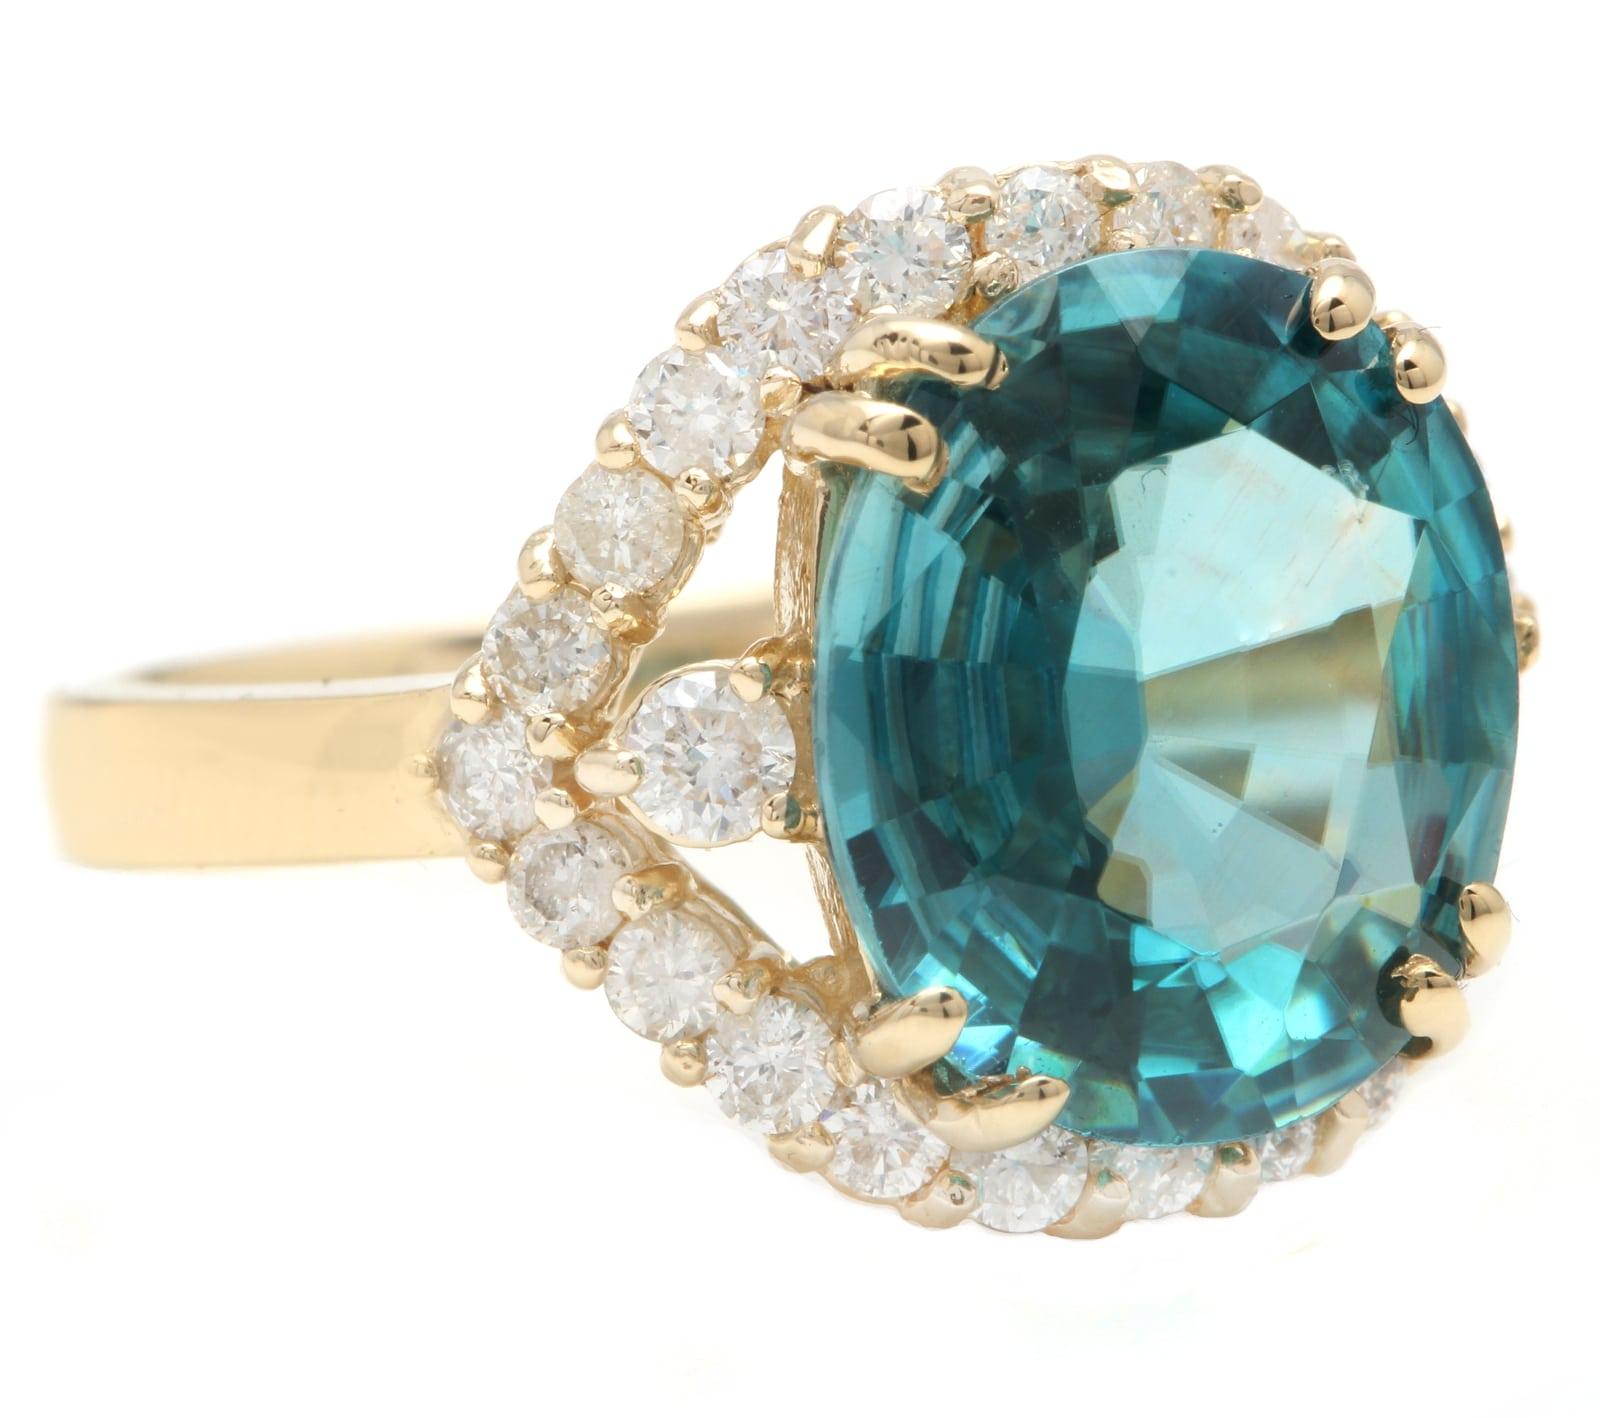 6.90 Carats Natural Very Nice Looking Blue Zircon and Diamond 14K Yellow Gold Ring

Suggested Replacement Value: 7,000.00

Total Natural Cushion Shaped Zircon Weights: Approx. 6.00 Carats 

Zircon Measures: Approx. 12 x 10mm

Natural Round Diamonds